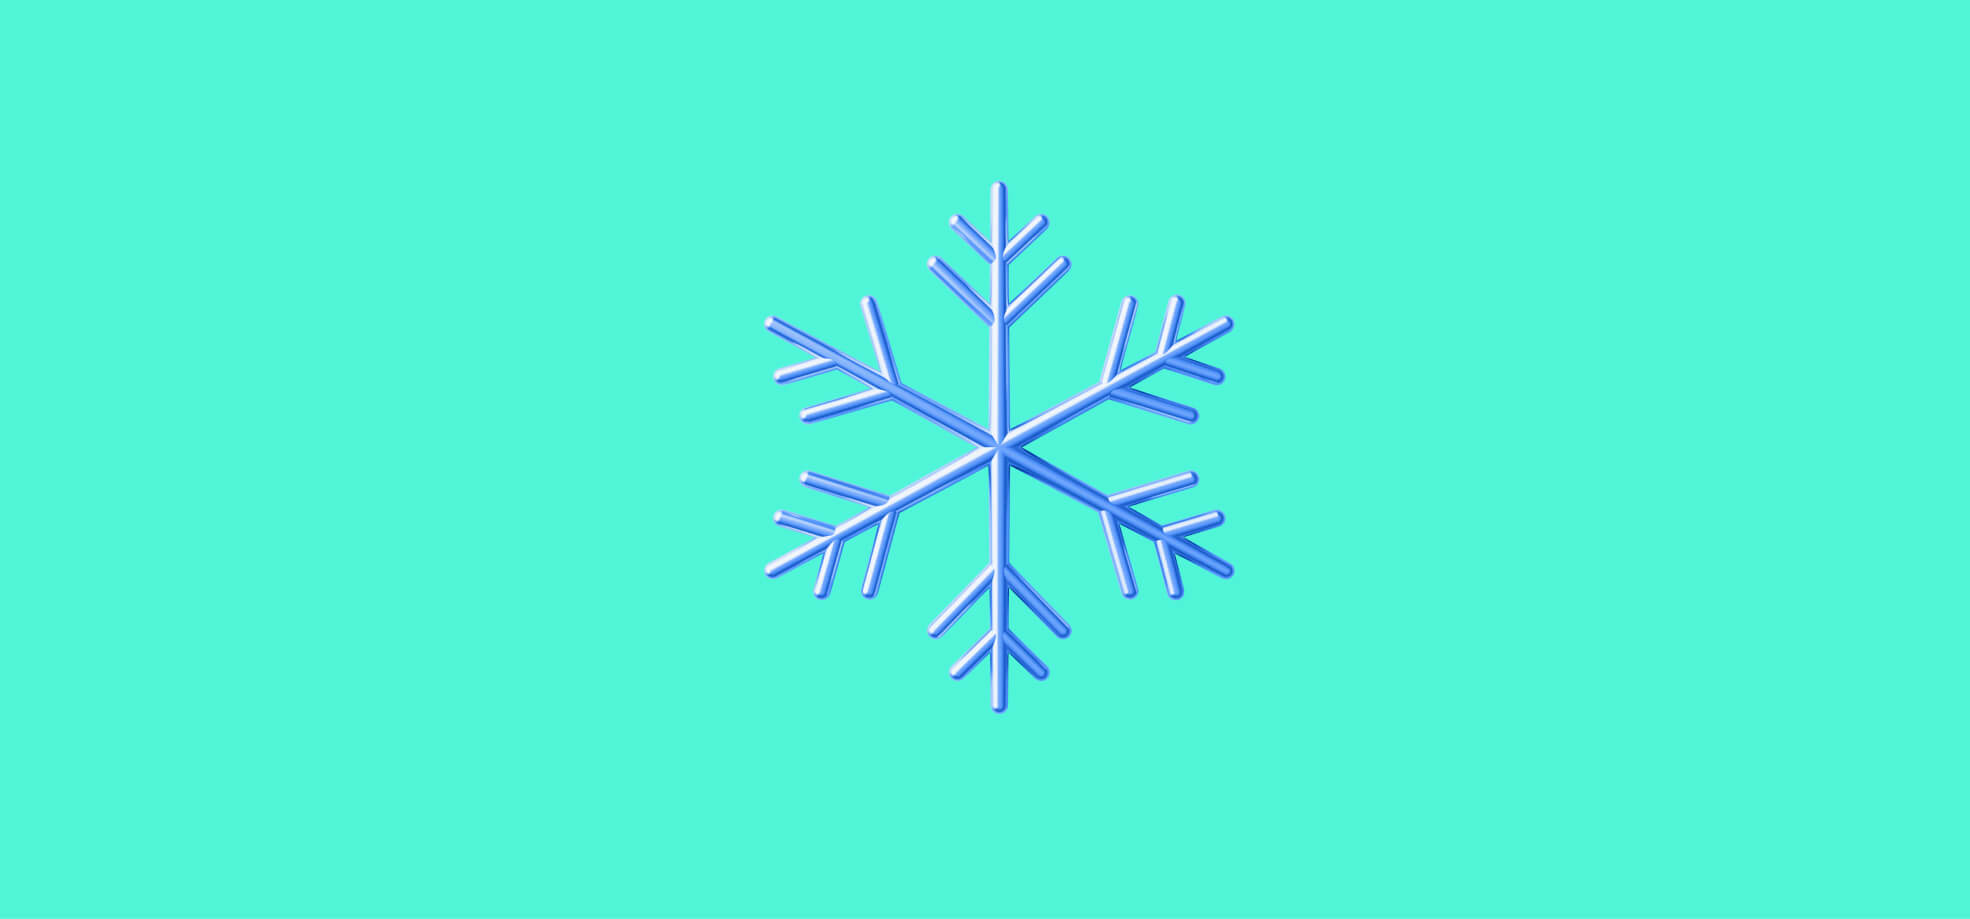 a snowflake on green background